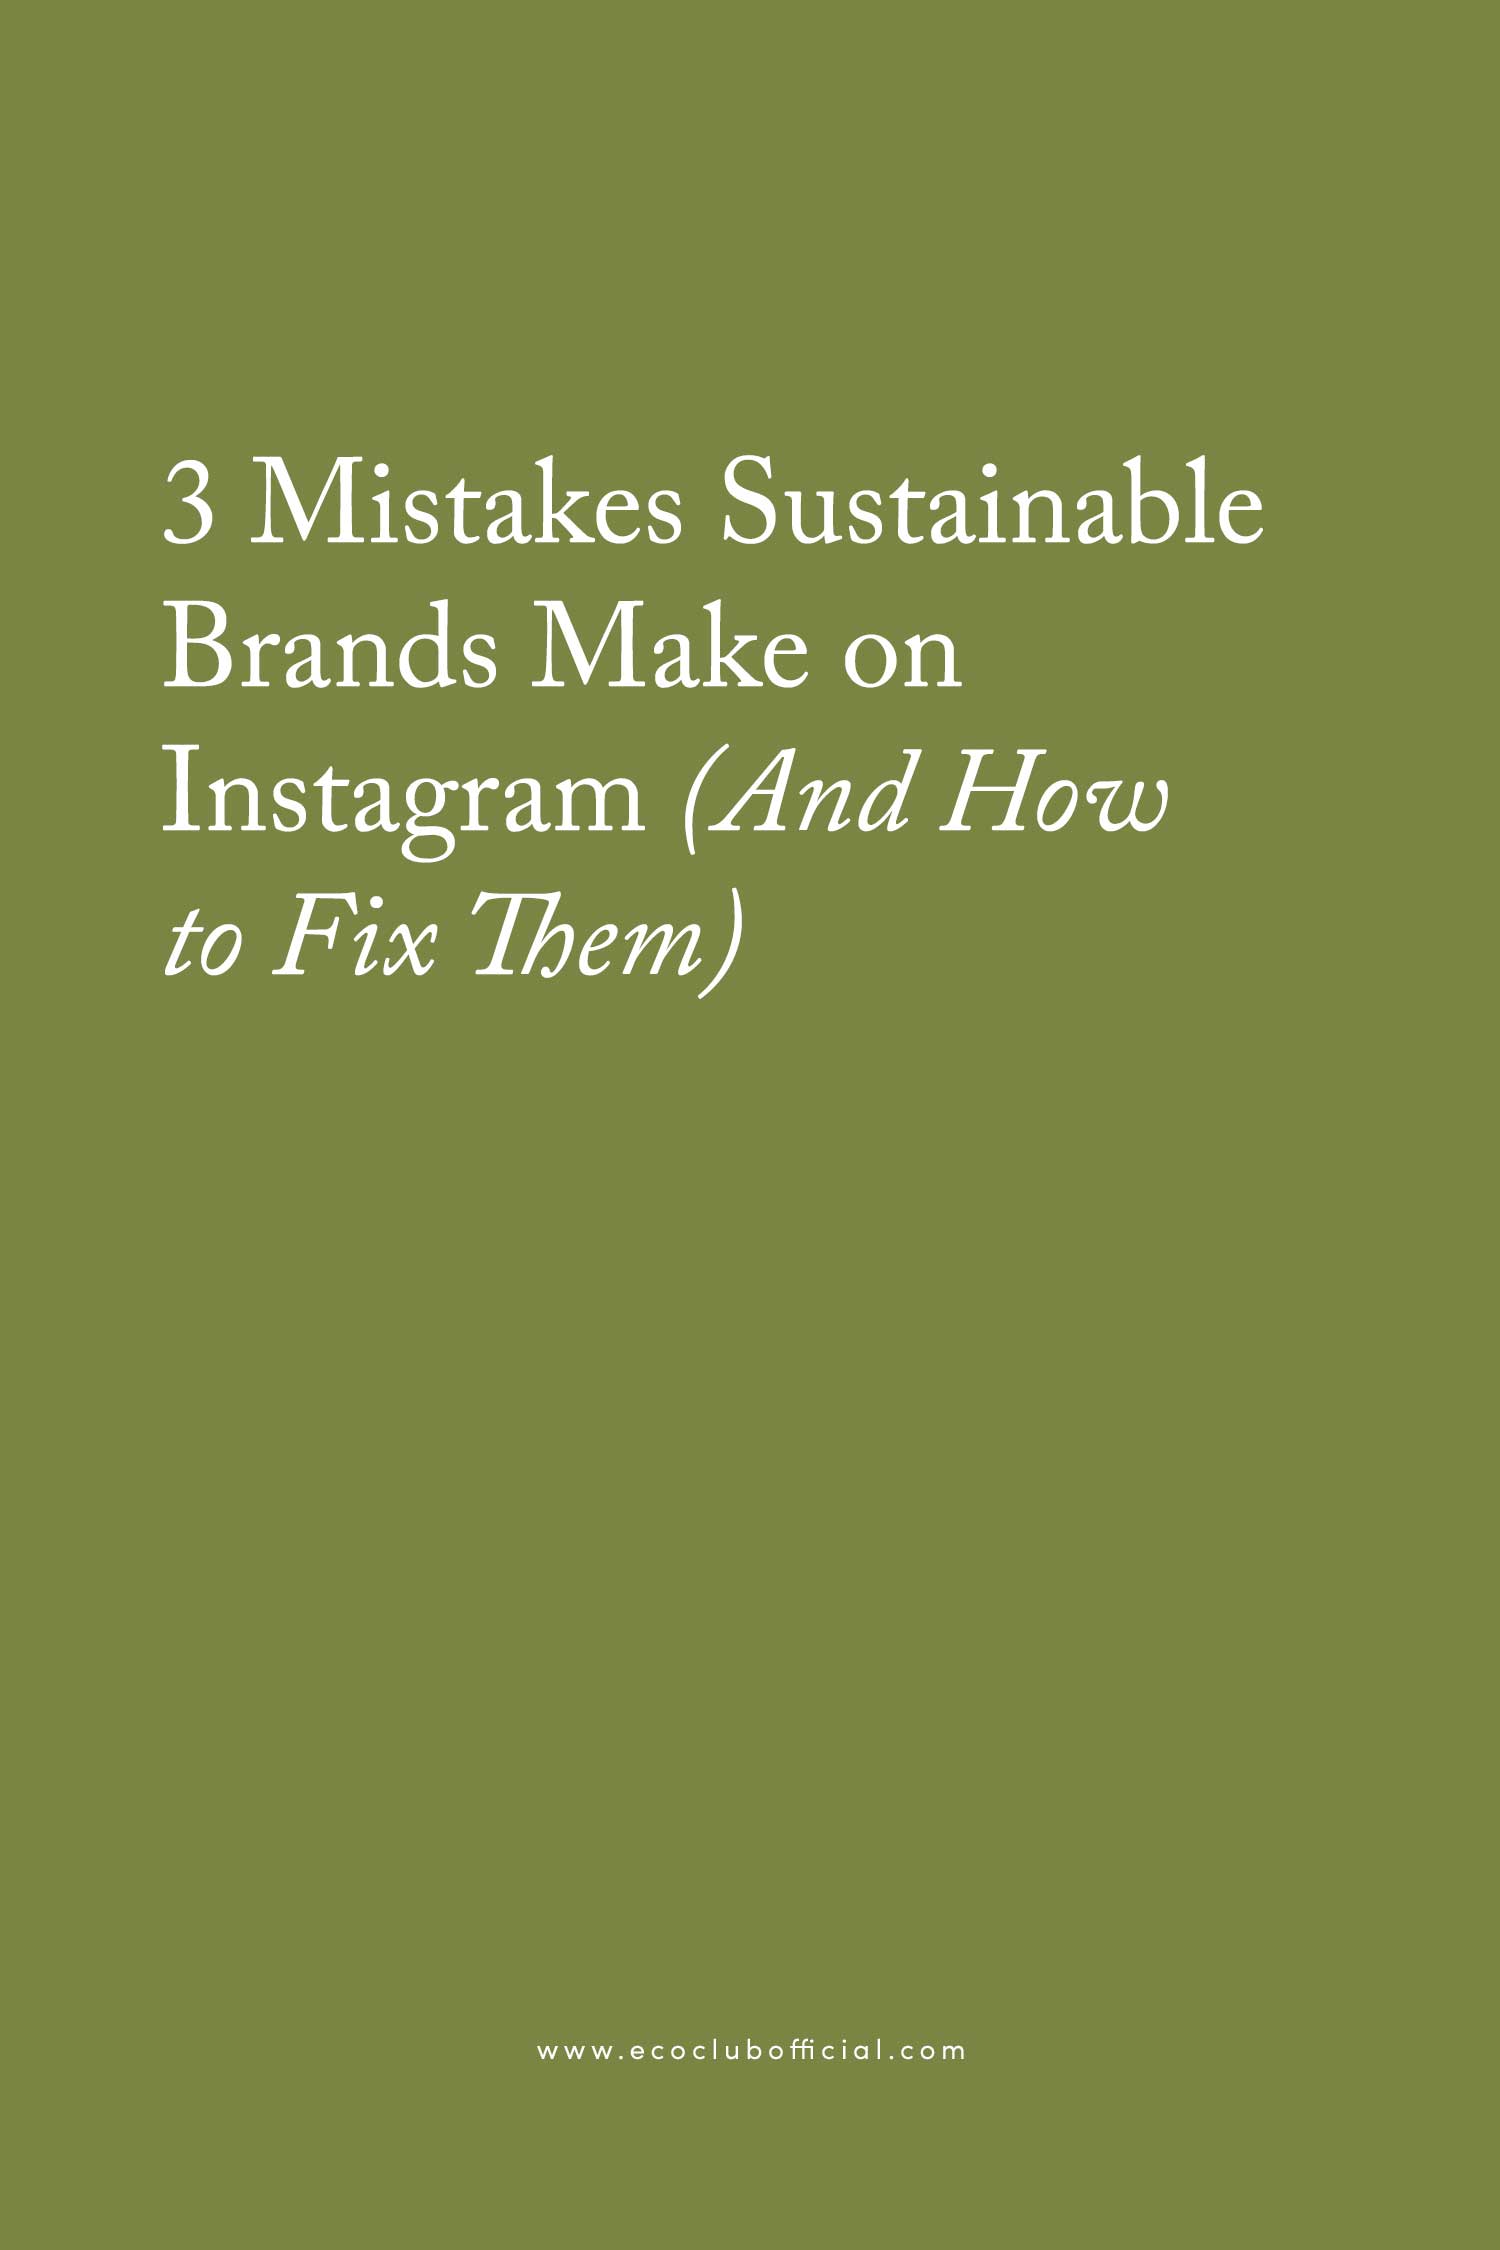 3 Mistakes Sustainable Brands Make on Instagram, And How To Fix Them